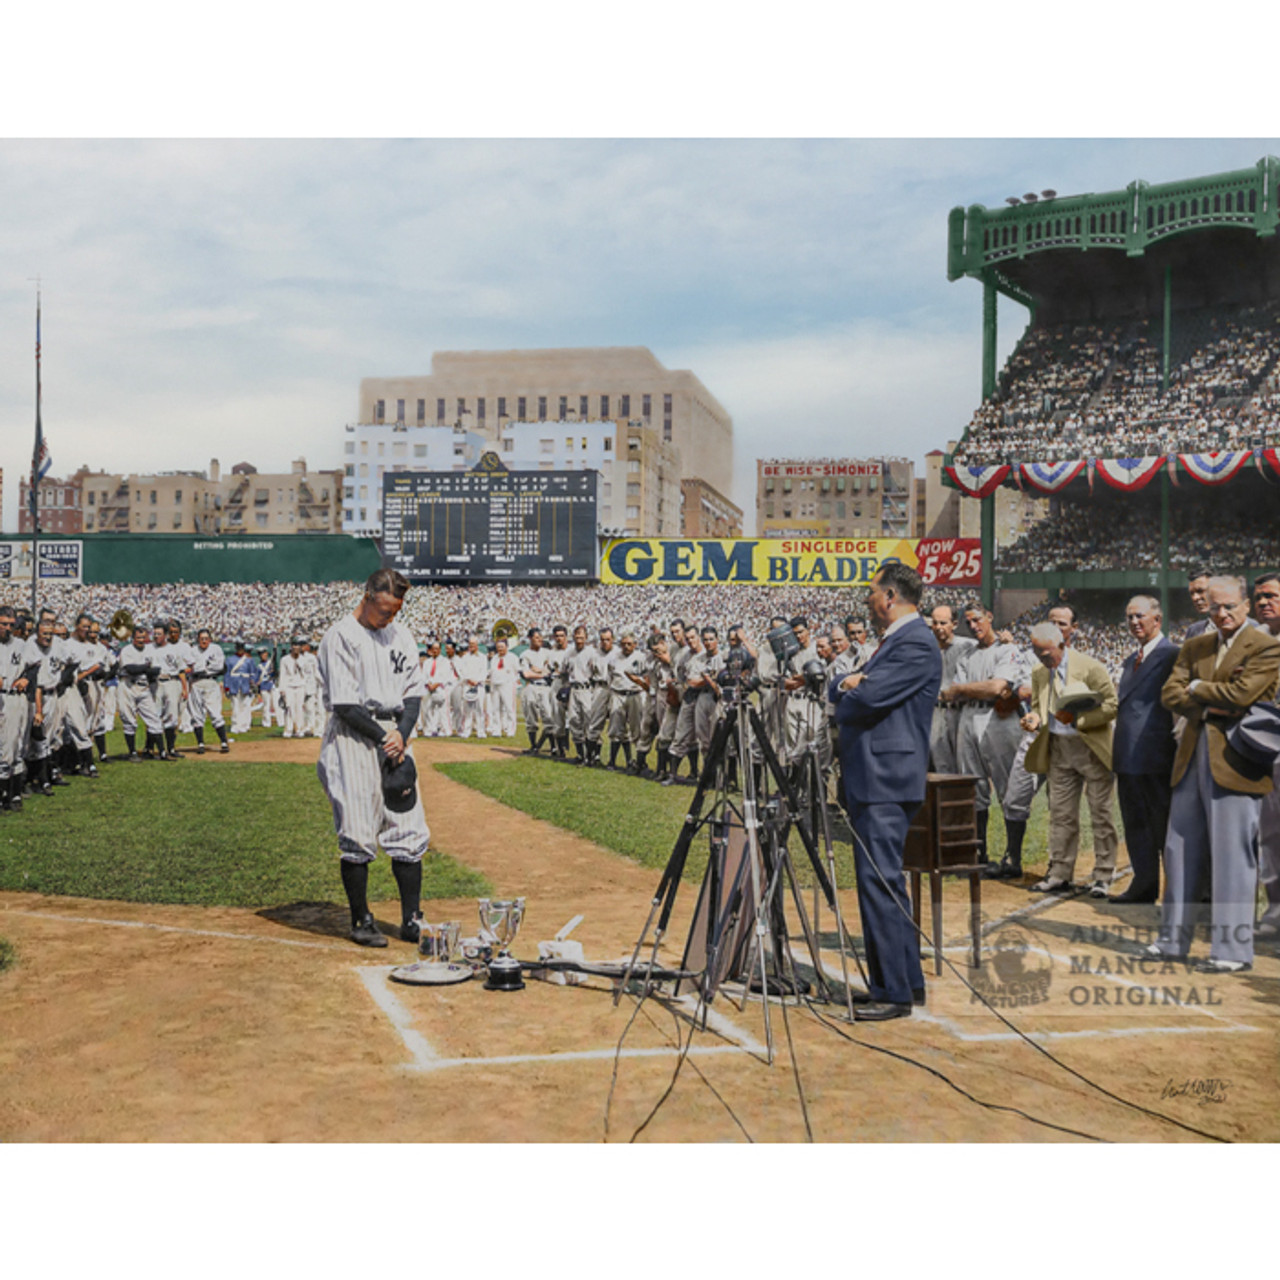 RARE NEW YORK YANKEES Still Gary Cooper As Lou Gehrig Color